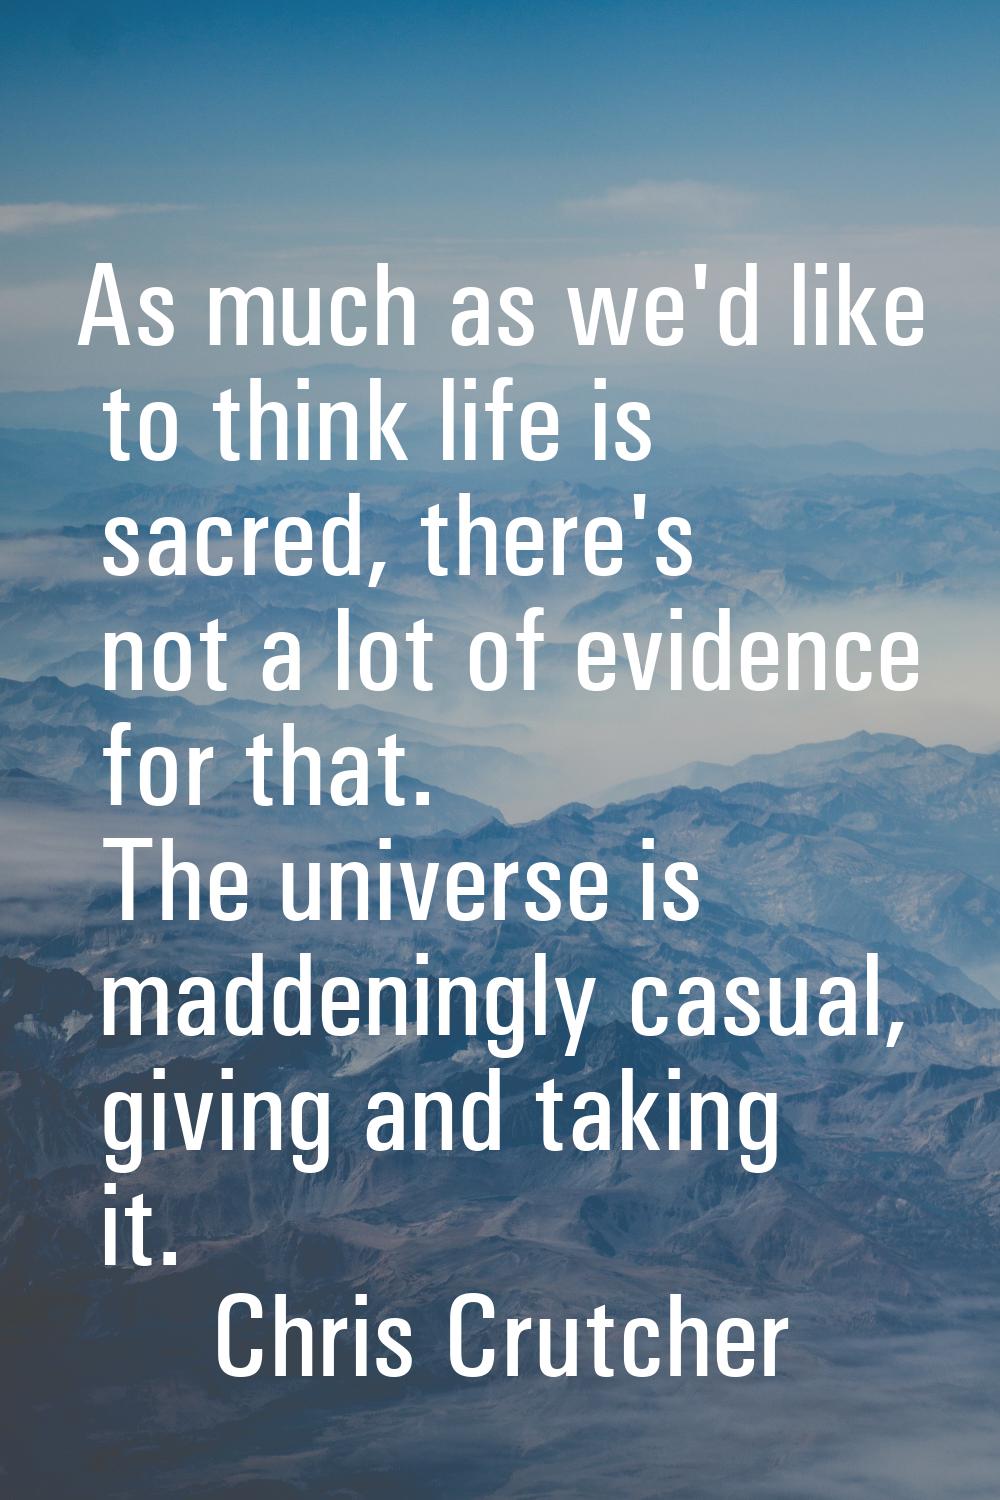 As much as we'd like to think life is sacred, there's not a lot of evidence for that. The universe 